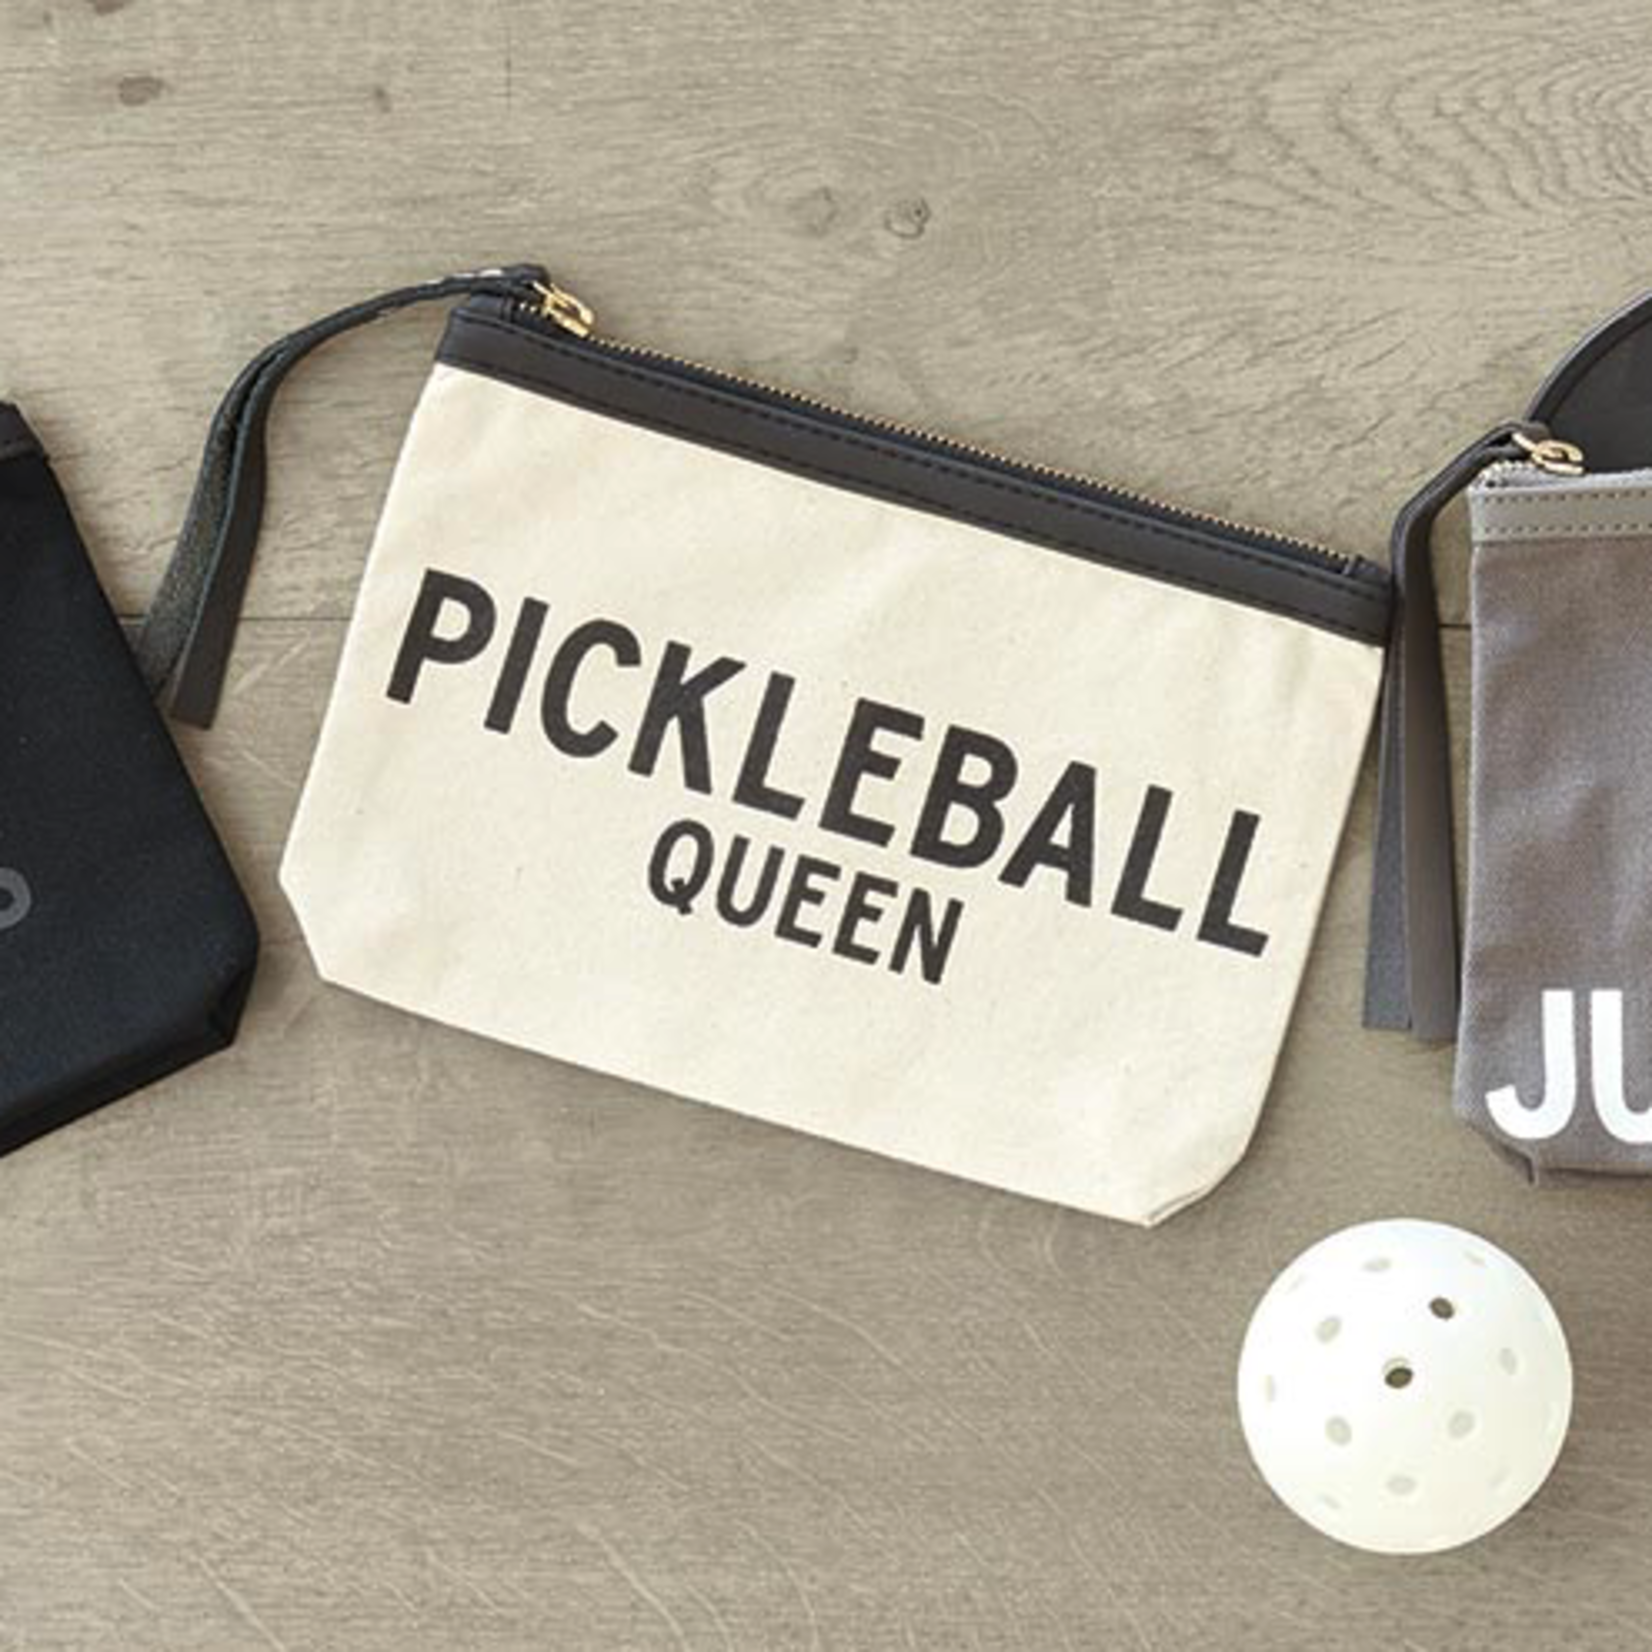 Outside The Box 9x6 "Pickleball Queen" White Canvas Pouch With Leather